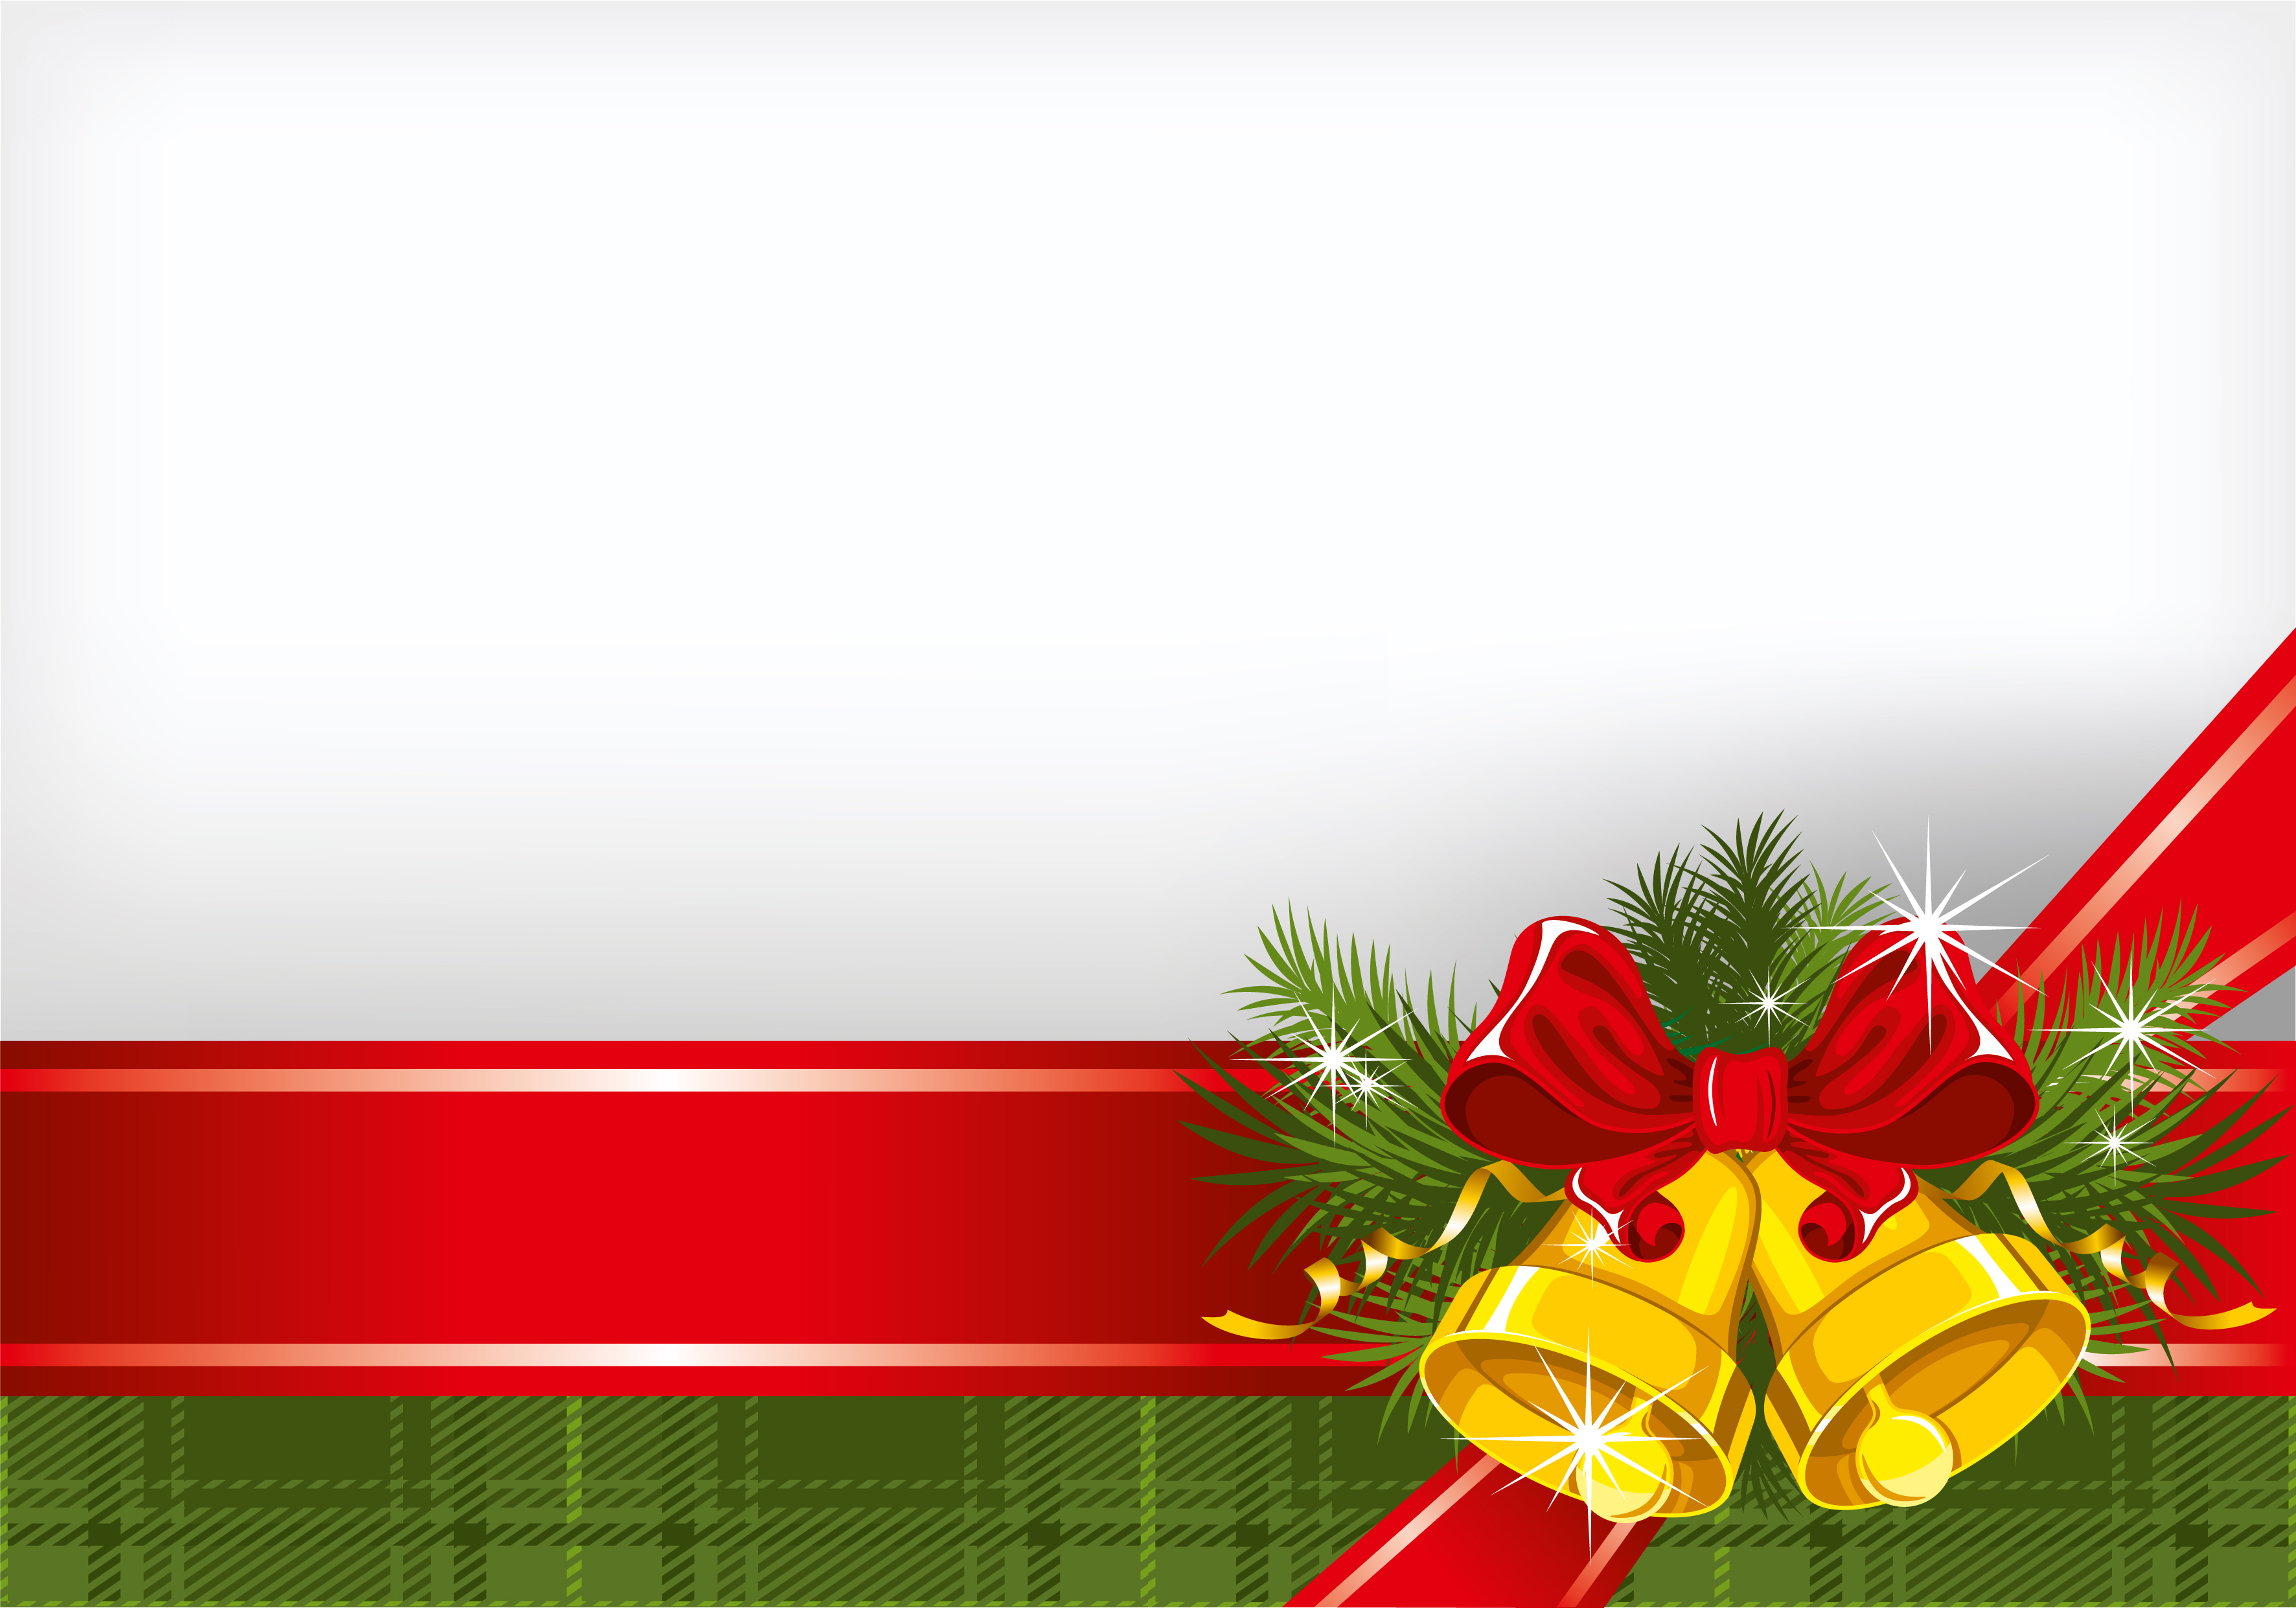 19 Free Christmas Backgrounds Vector Images   Christmas Vector